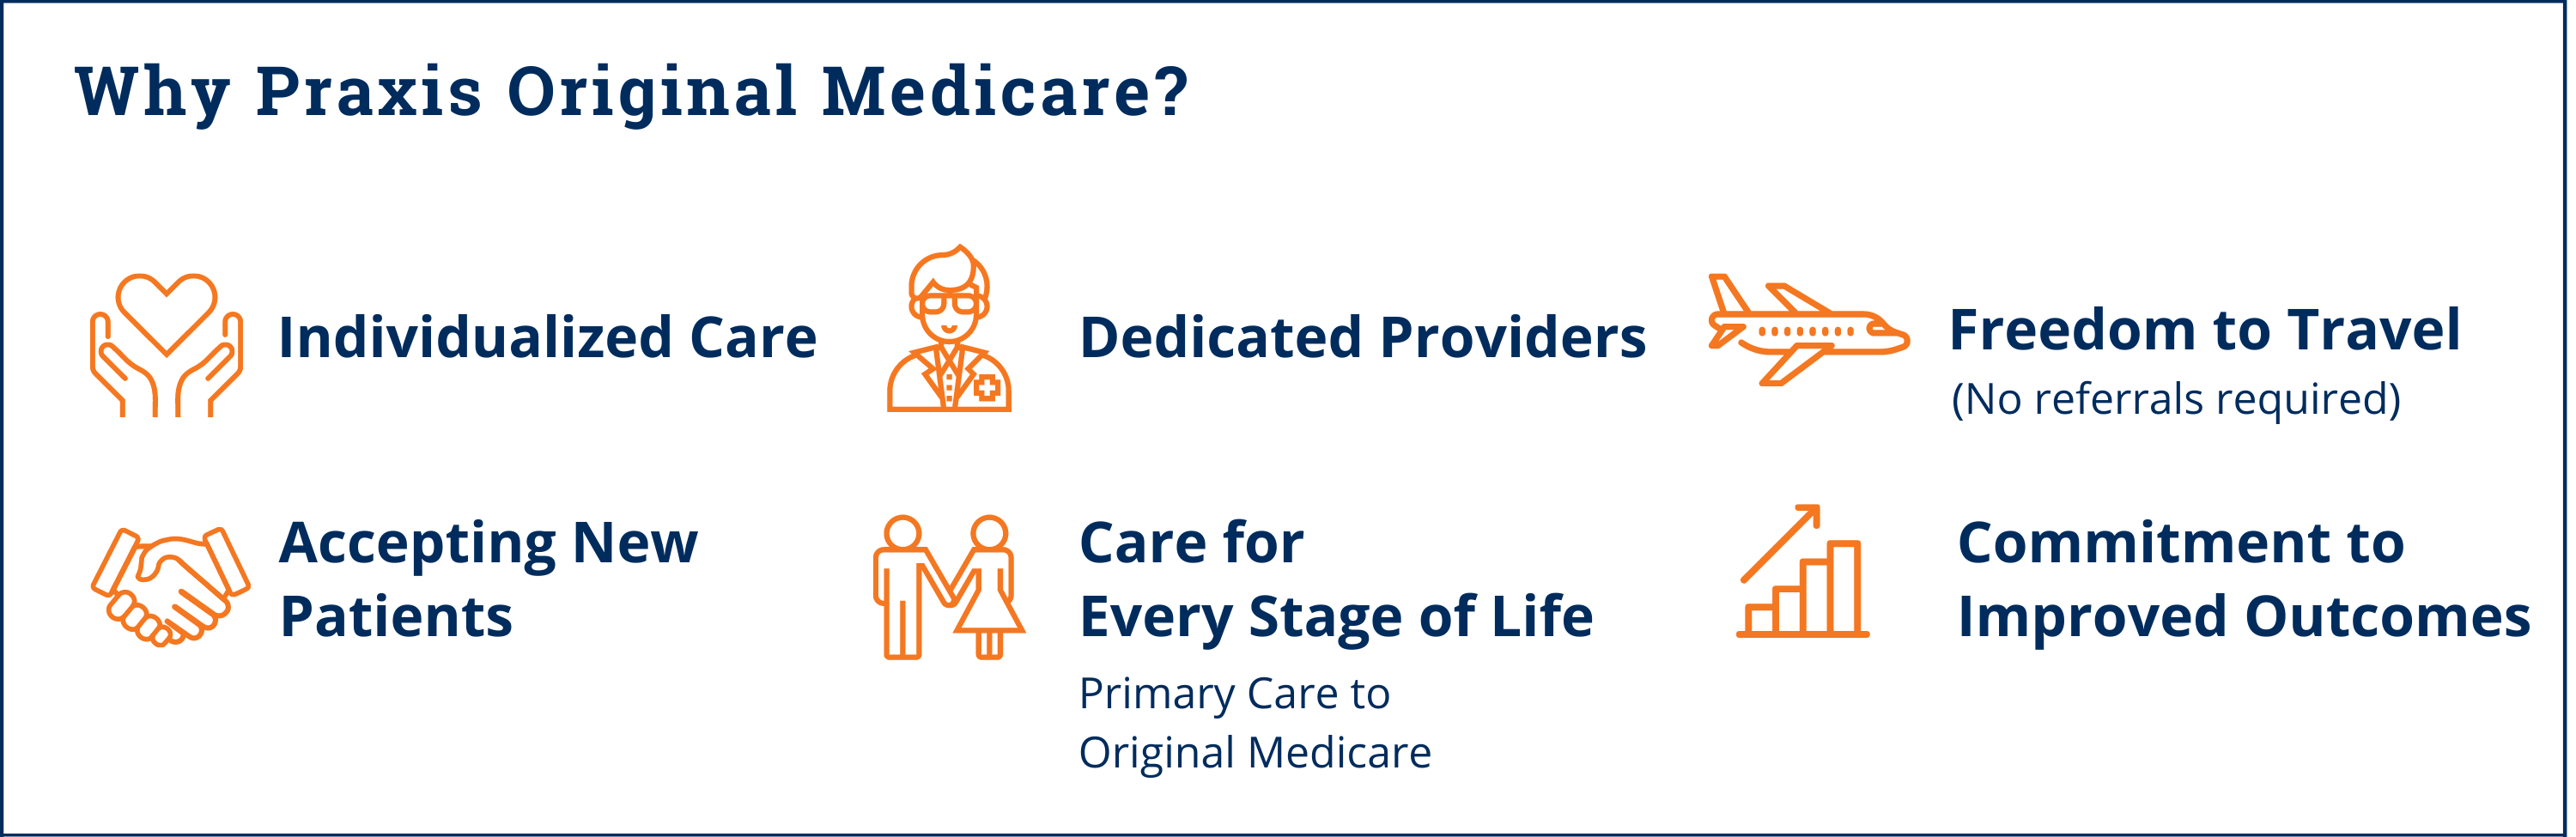 Why Praxis Medicare